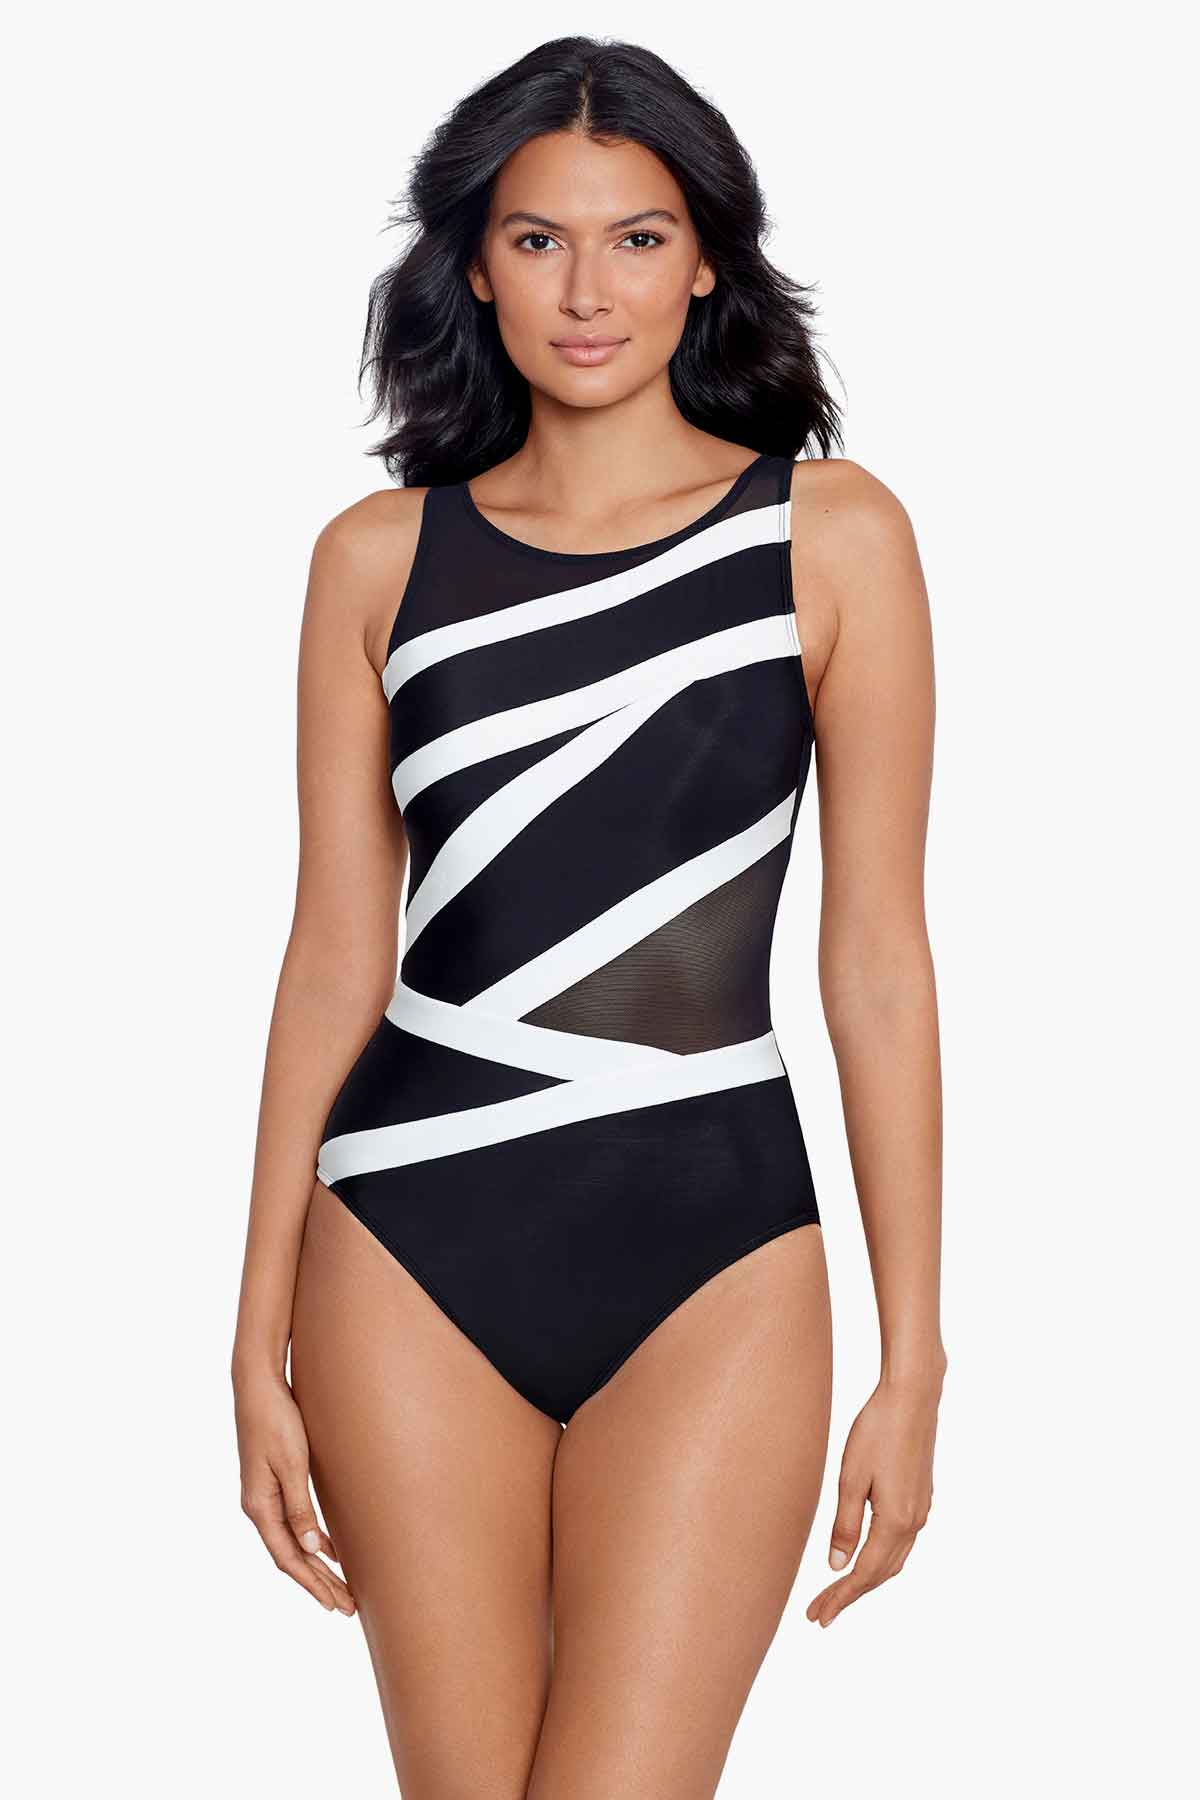 Magicsuit Angelina Belted One-Piece Swimsuit Black 6008014 16